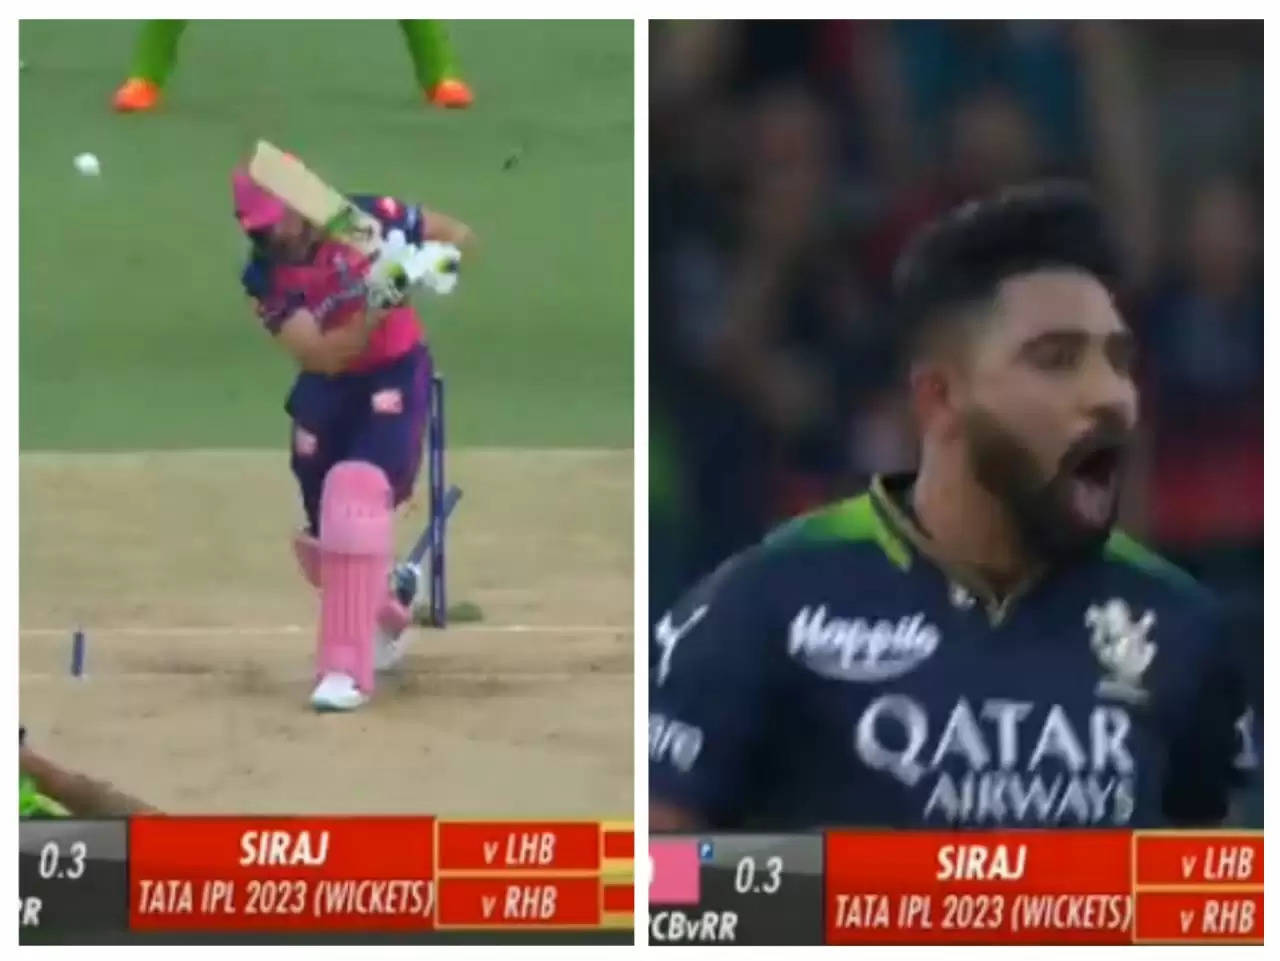 Mohammed Siraj bowled a terrific ball to dismiss Jos Buttler on a duck.